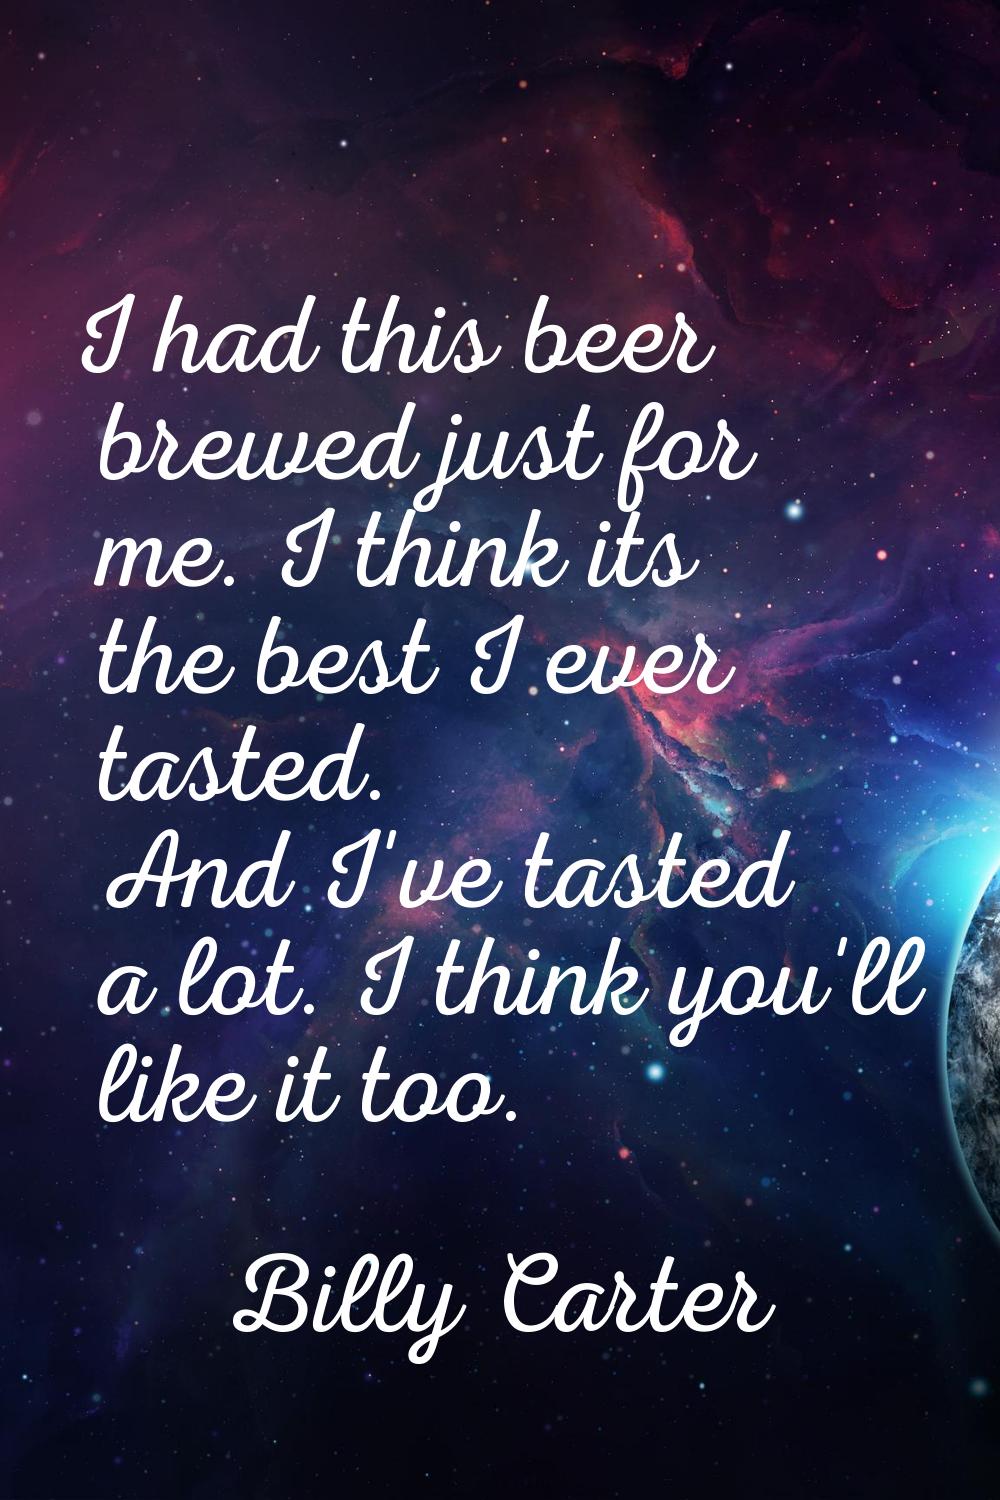 I had this beer brewed just for me. I think its the best I ever tasted. And I've tasted a lot. I th